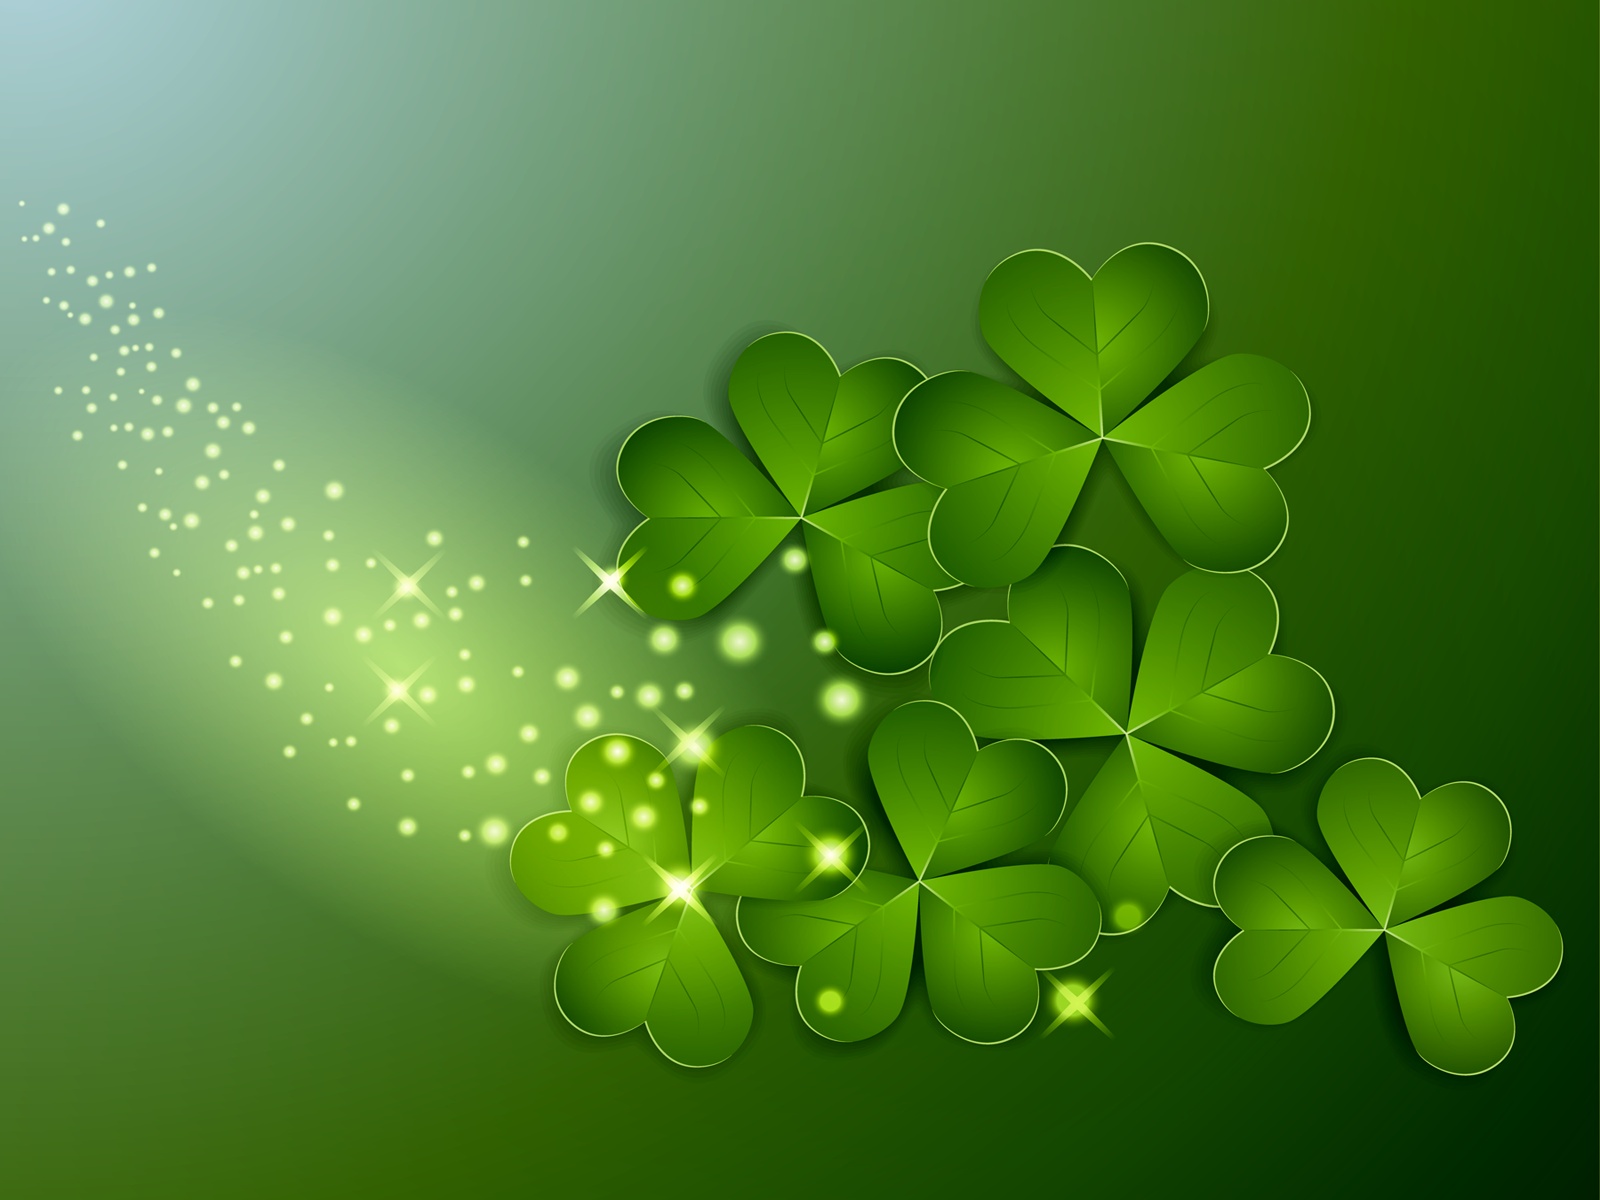 St Patricks Day Wallpaper   Miscellaneous Photos and Wallpapers